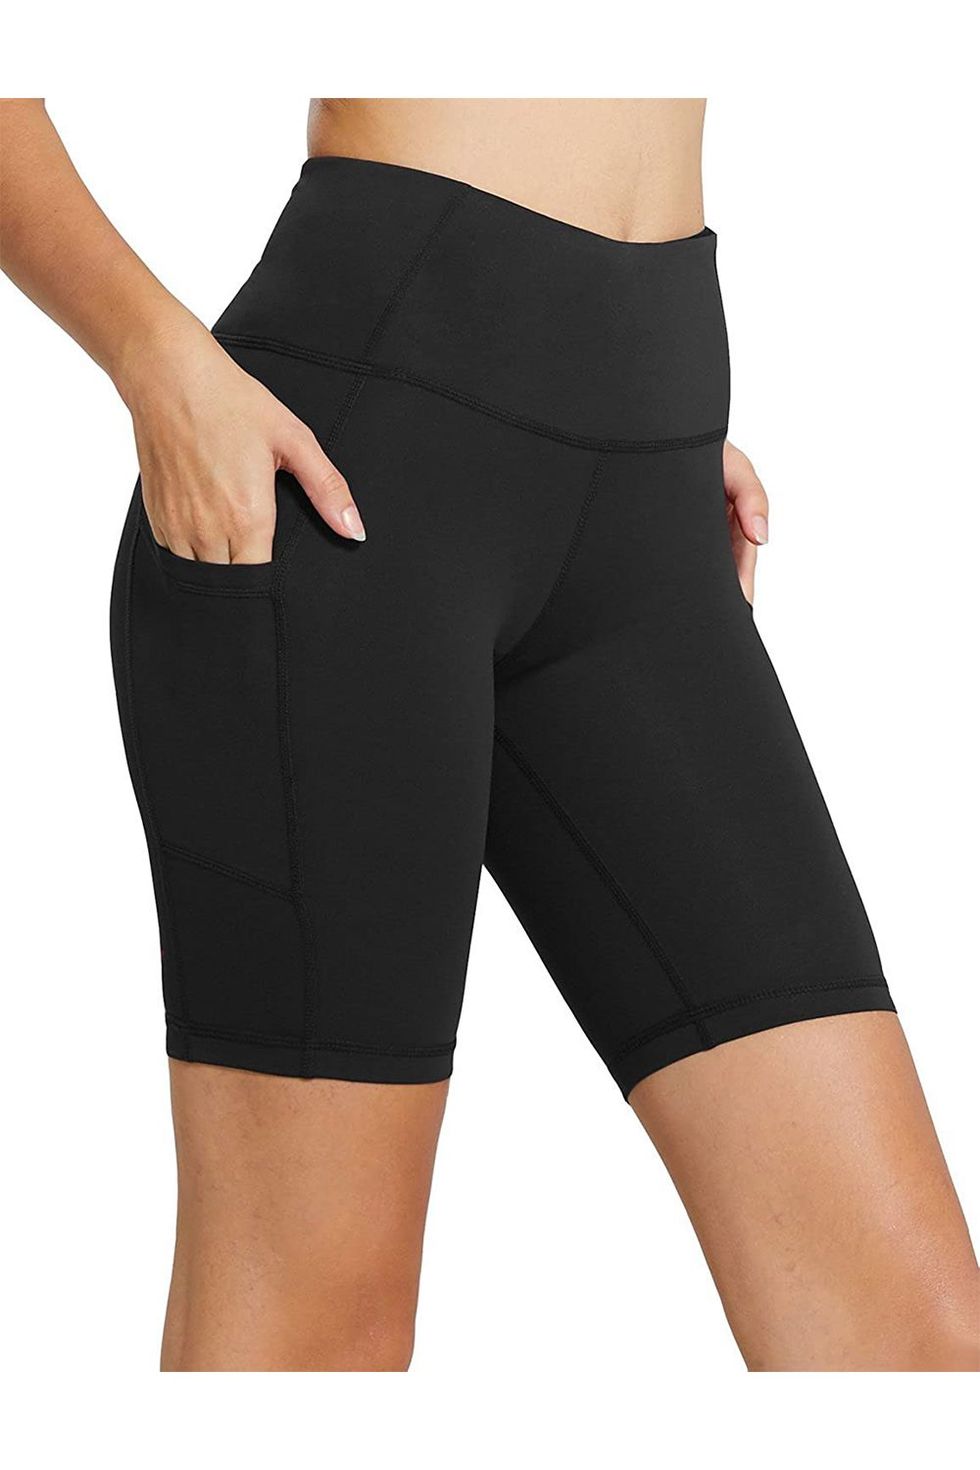 8" High Waist Compression Exercise Shorts